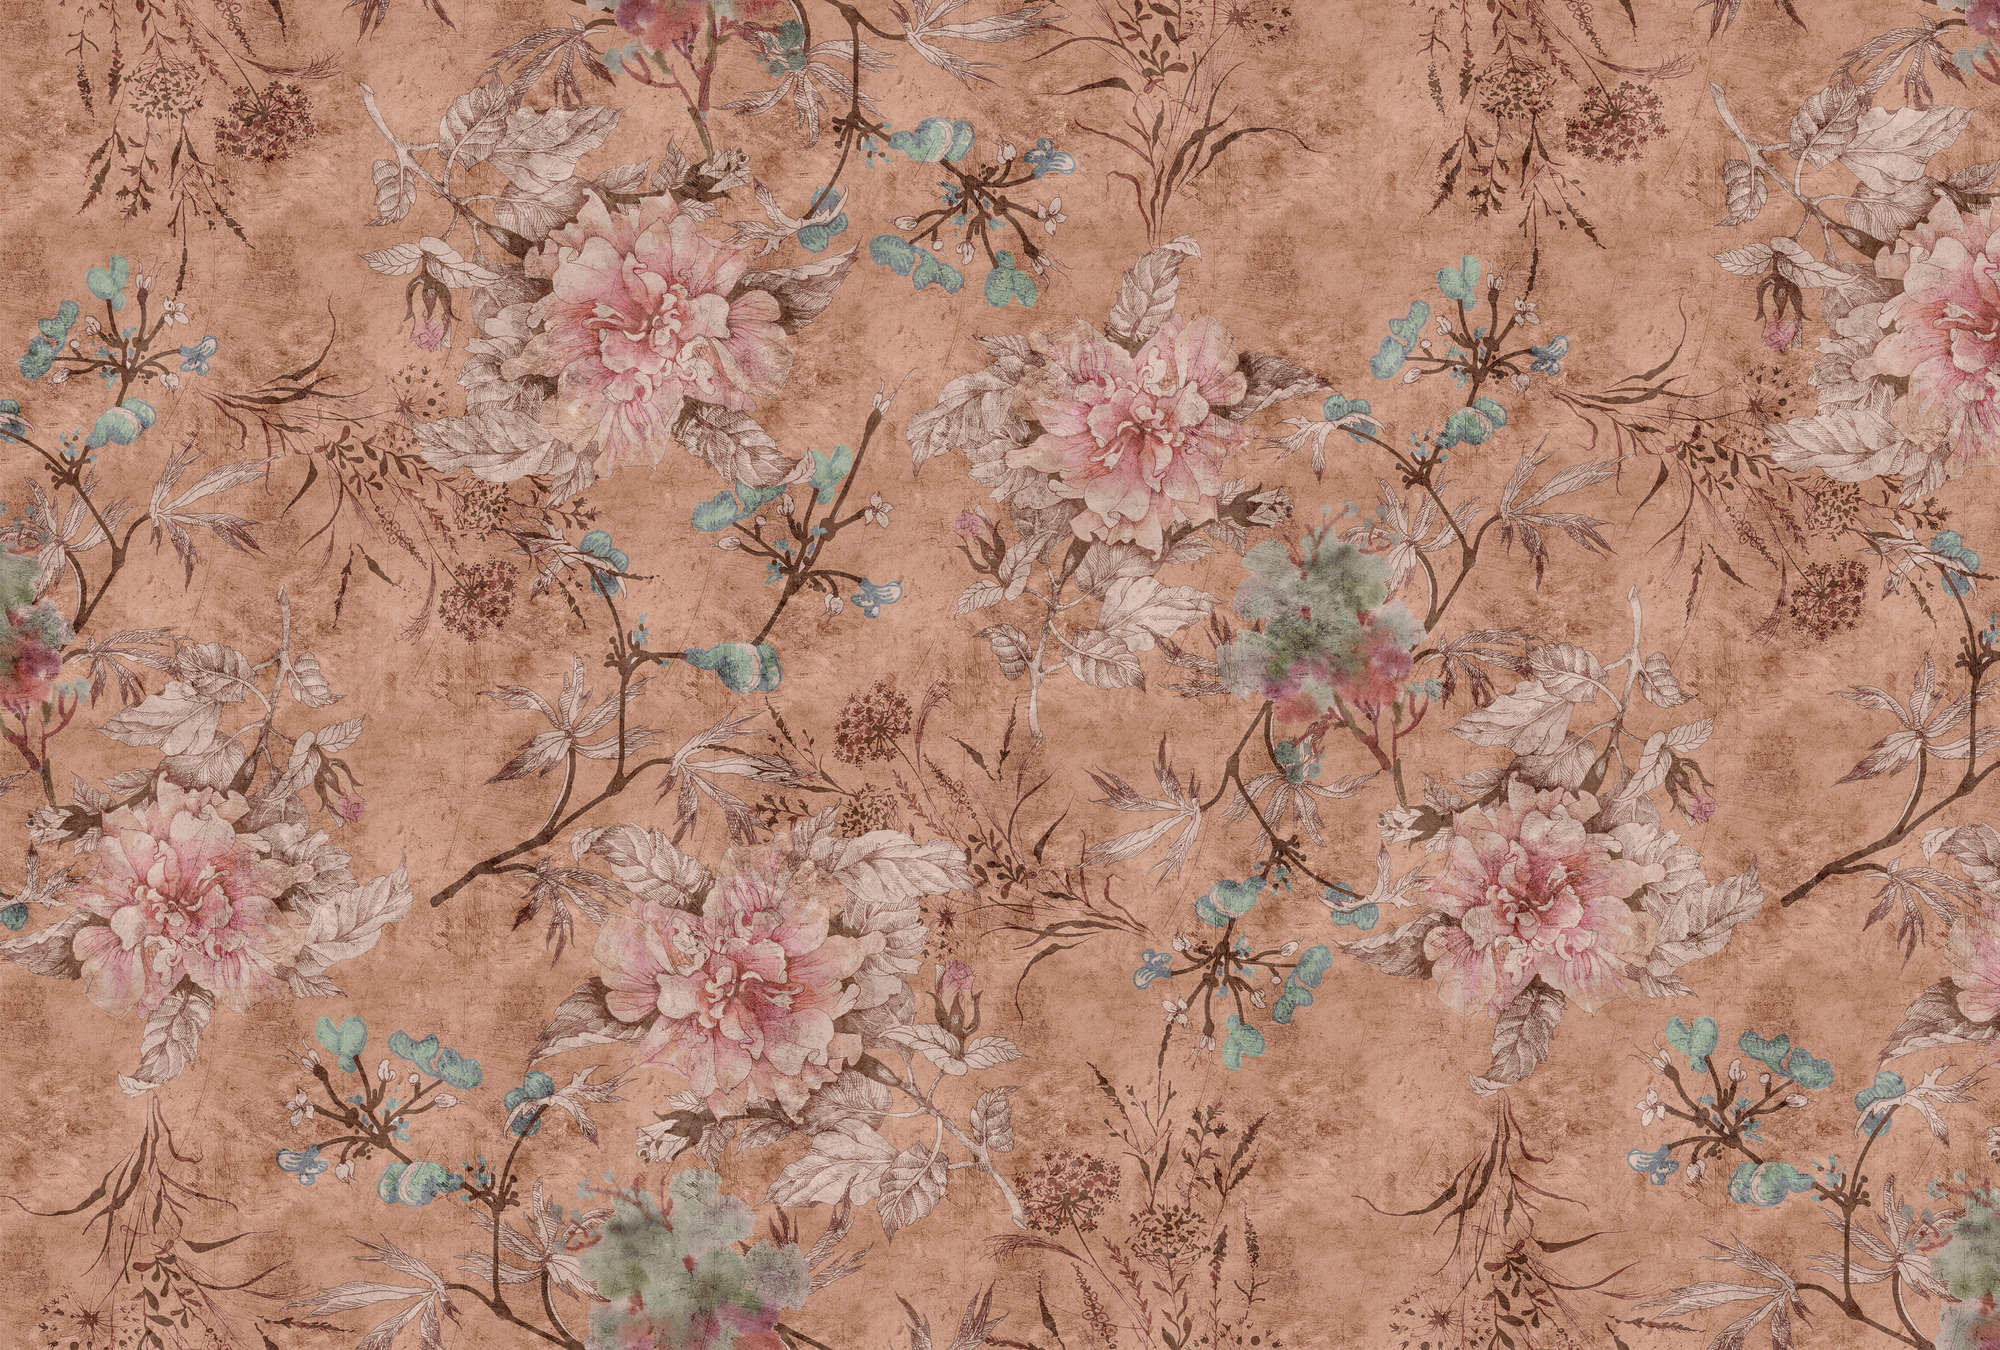             Tenderblossom 3 - Vintage style floral pattern digital print wallpaper - Pink, Red | Matte Smooth Non-woven
        